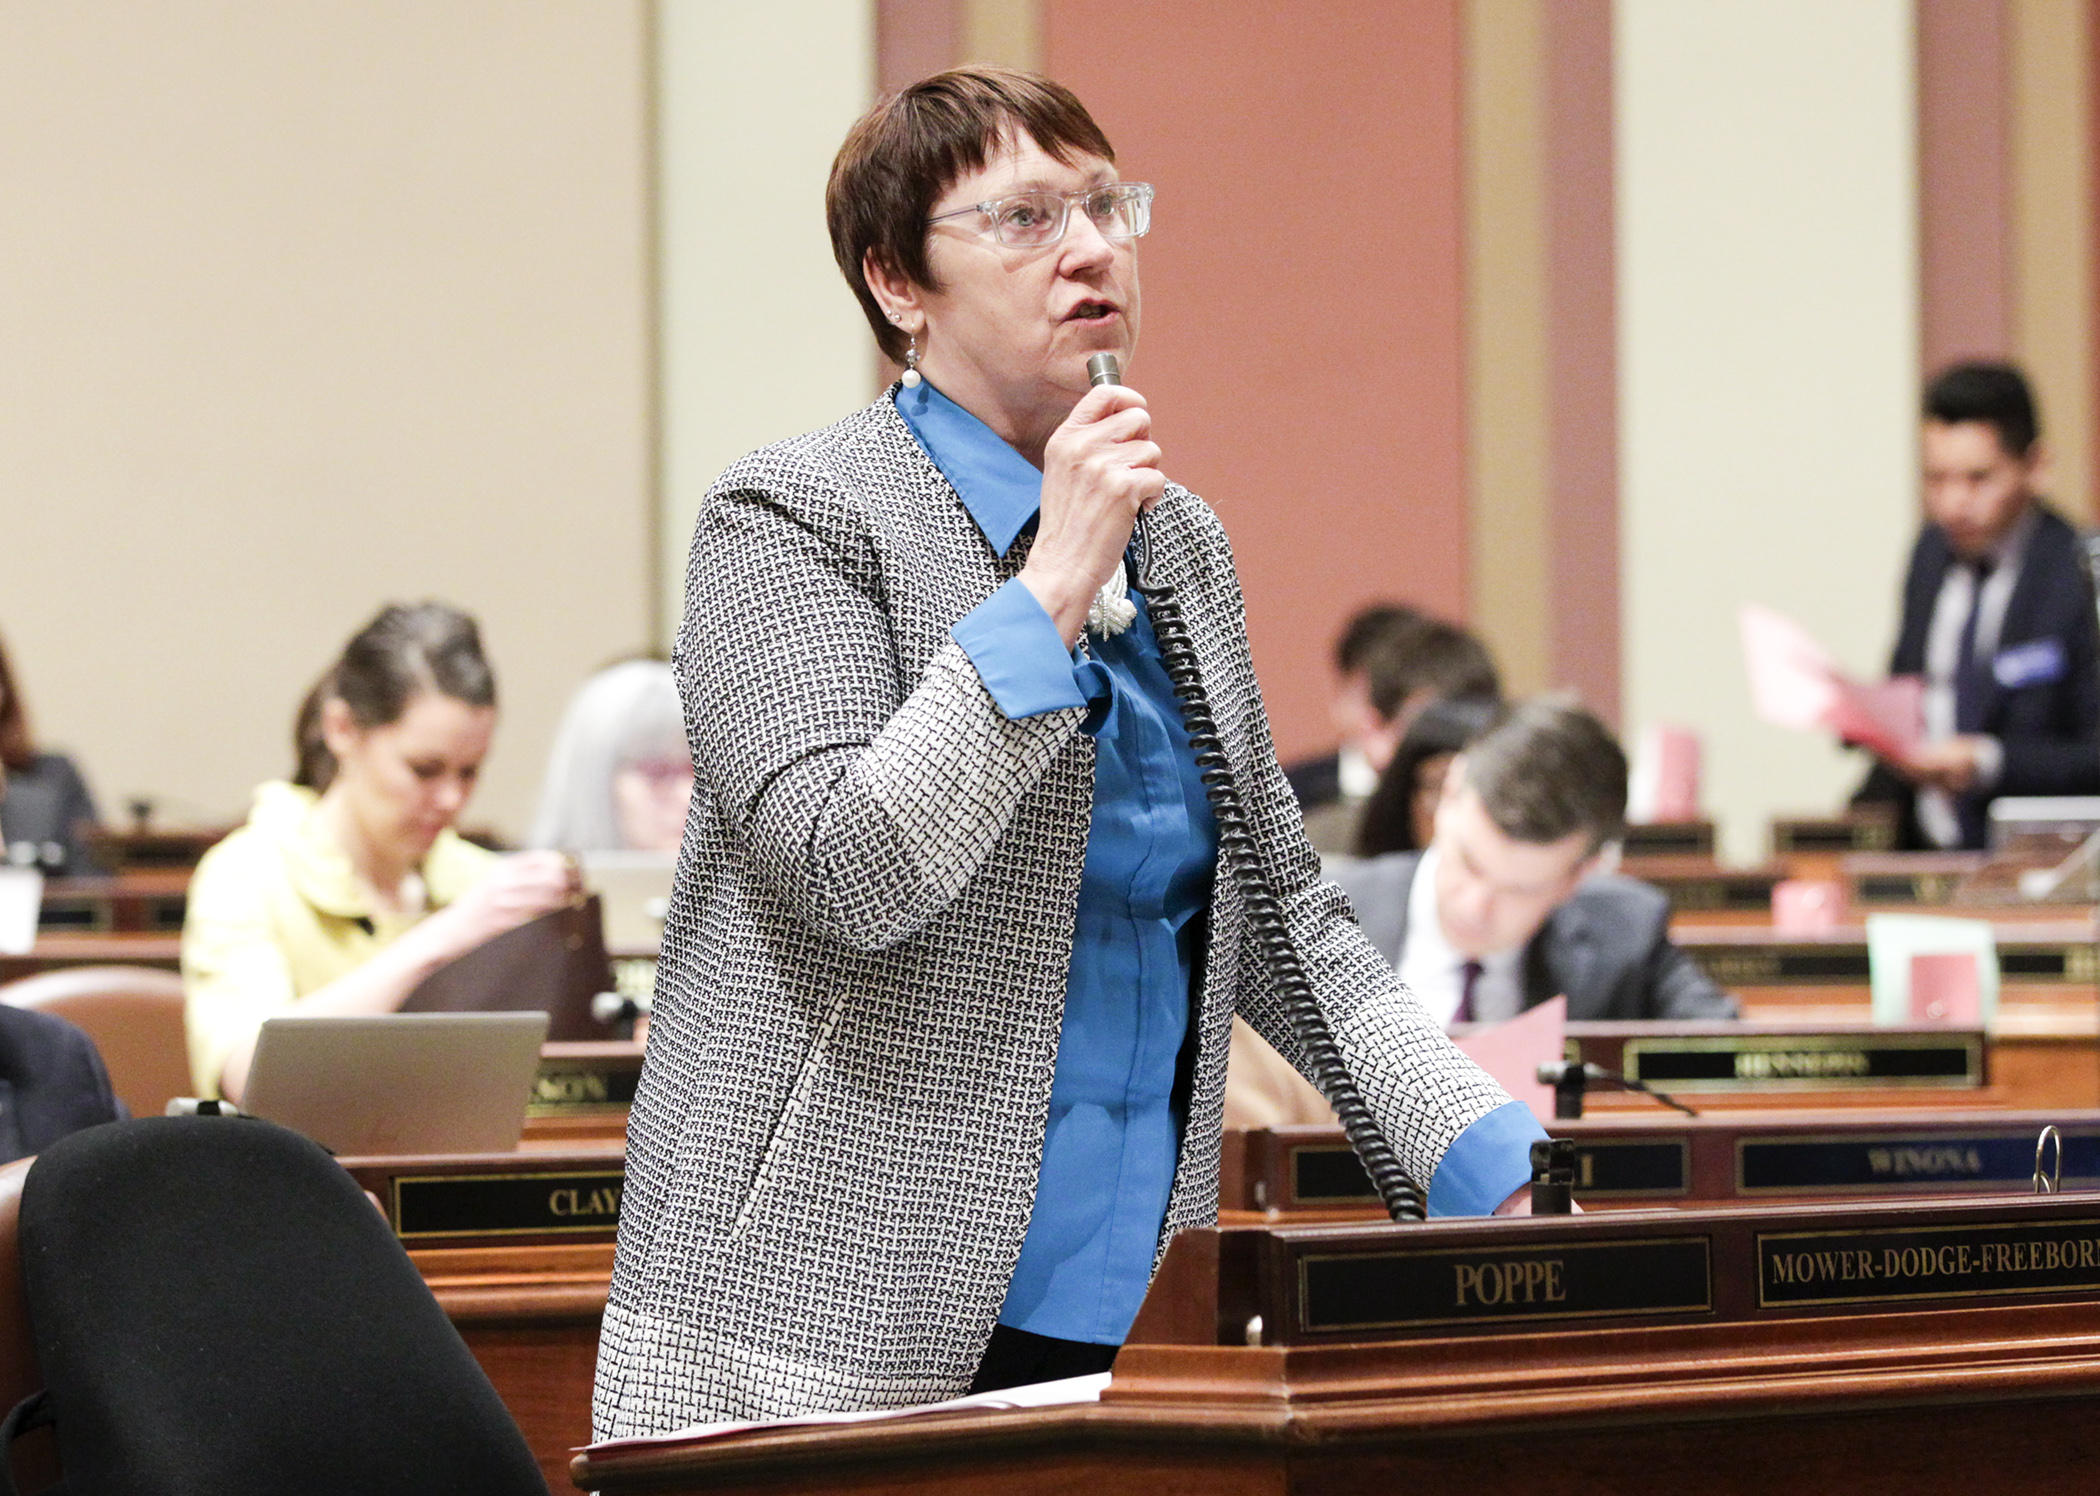 Rep. Jeanne Poppe, chair of the House Agriculture and Food Finance and Policy Division, describes provisions of HF1733, the omnibus agriculture policy bill, on May 1. Photo by Paul Battaglia